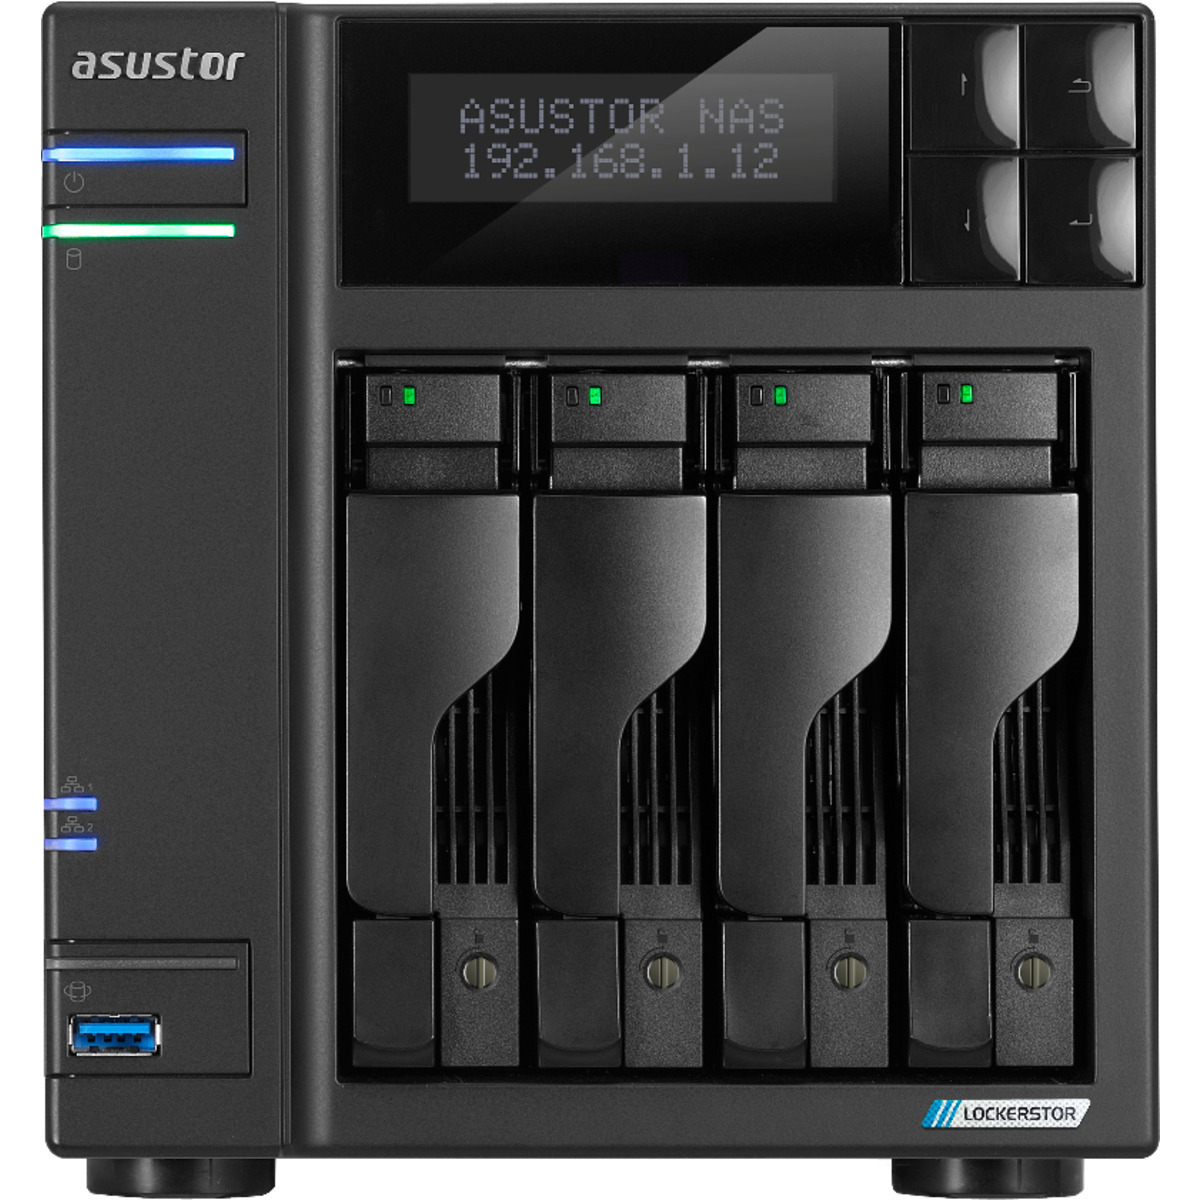 ASUSTOR LOCKERSTOR 4 Gen2 AS6704T 96tb 4-Bay Desktop Multimedia / Power User / Business NAS - Network Attached Storage Device 4x24tb Seagate IronWolf Pro ST24000NT002 3.5 7200rpm SATA 6Gb/s HDD NAS Class Drives Installed - Burn-In Tested - FREE RAM UPGRADE LOCKERSTOR 4 Gen2 AS6704T